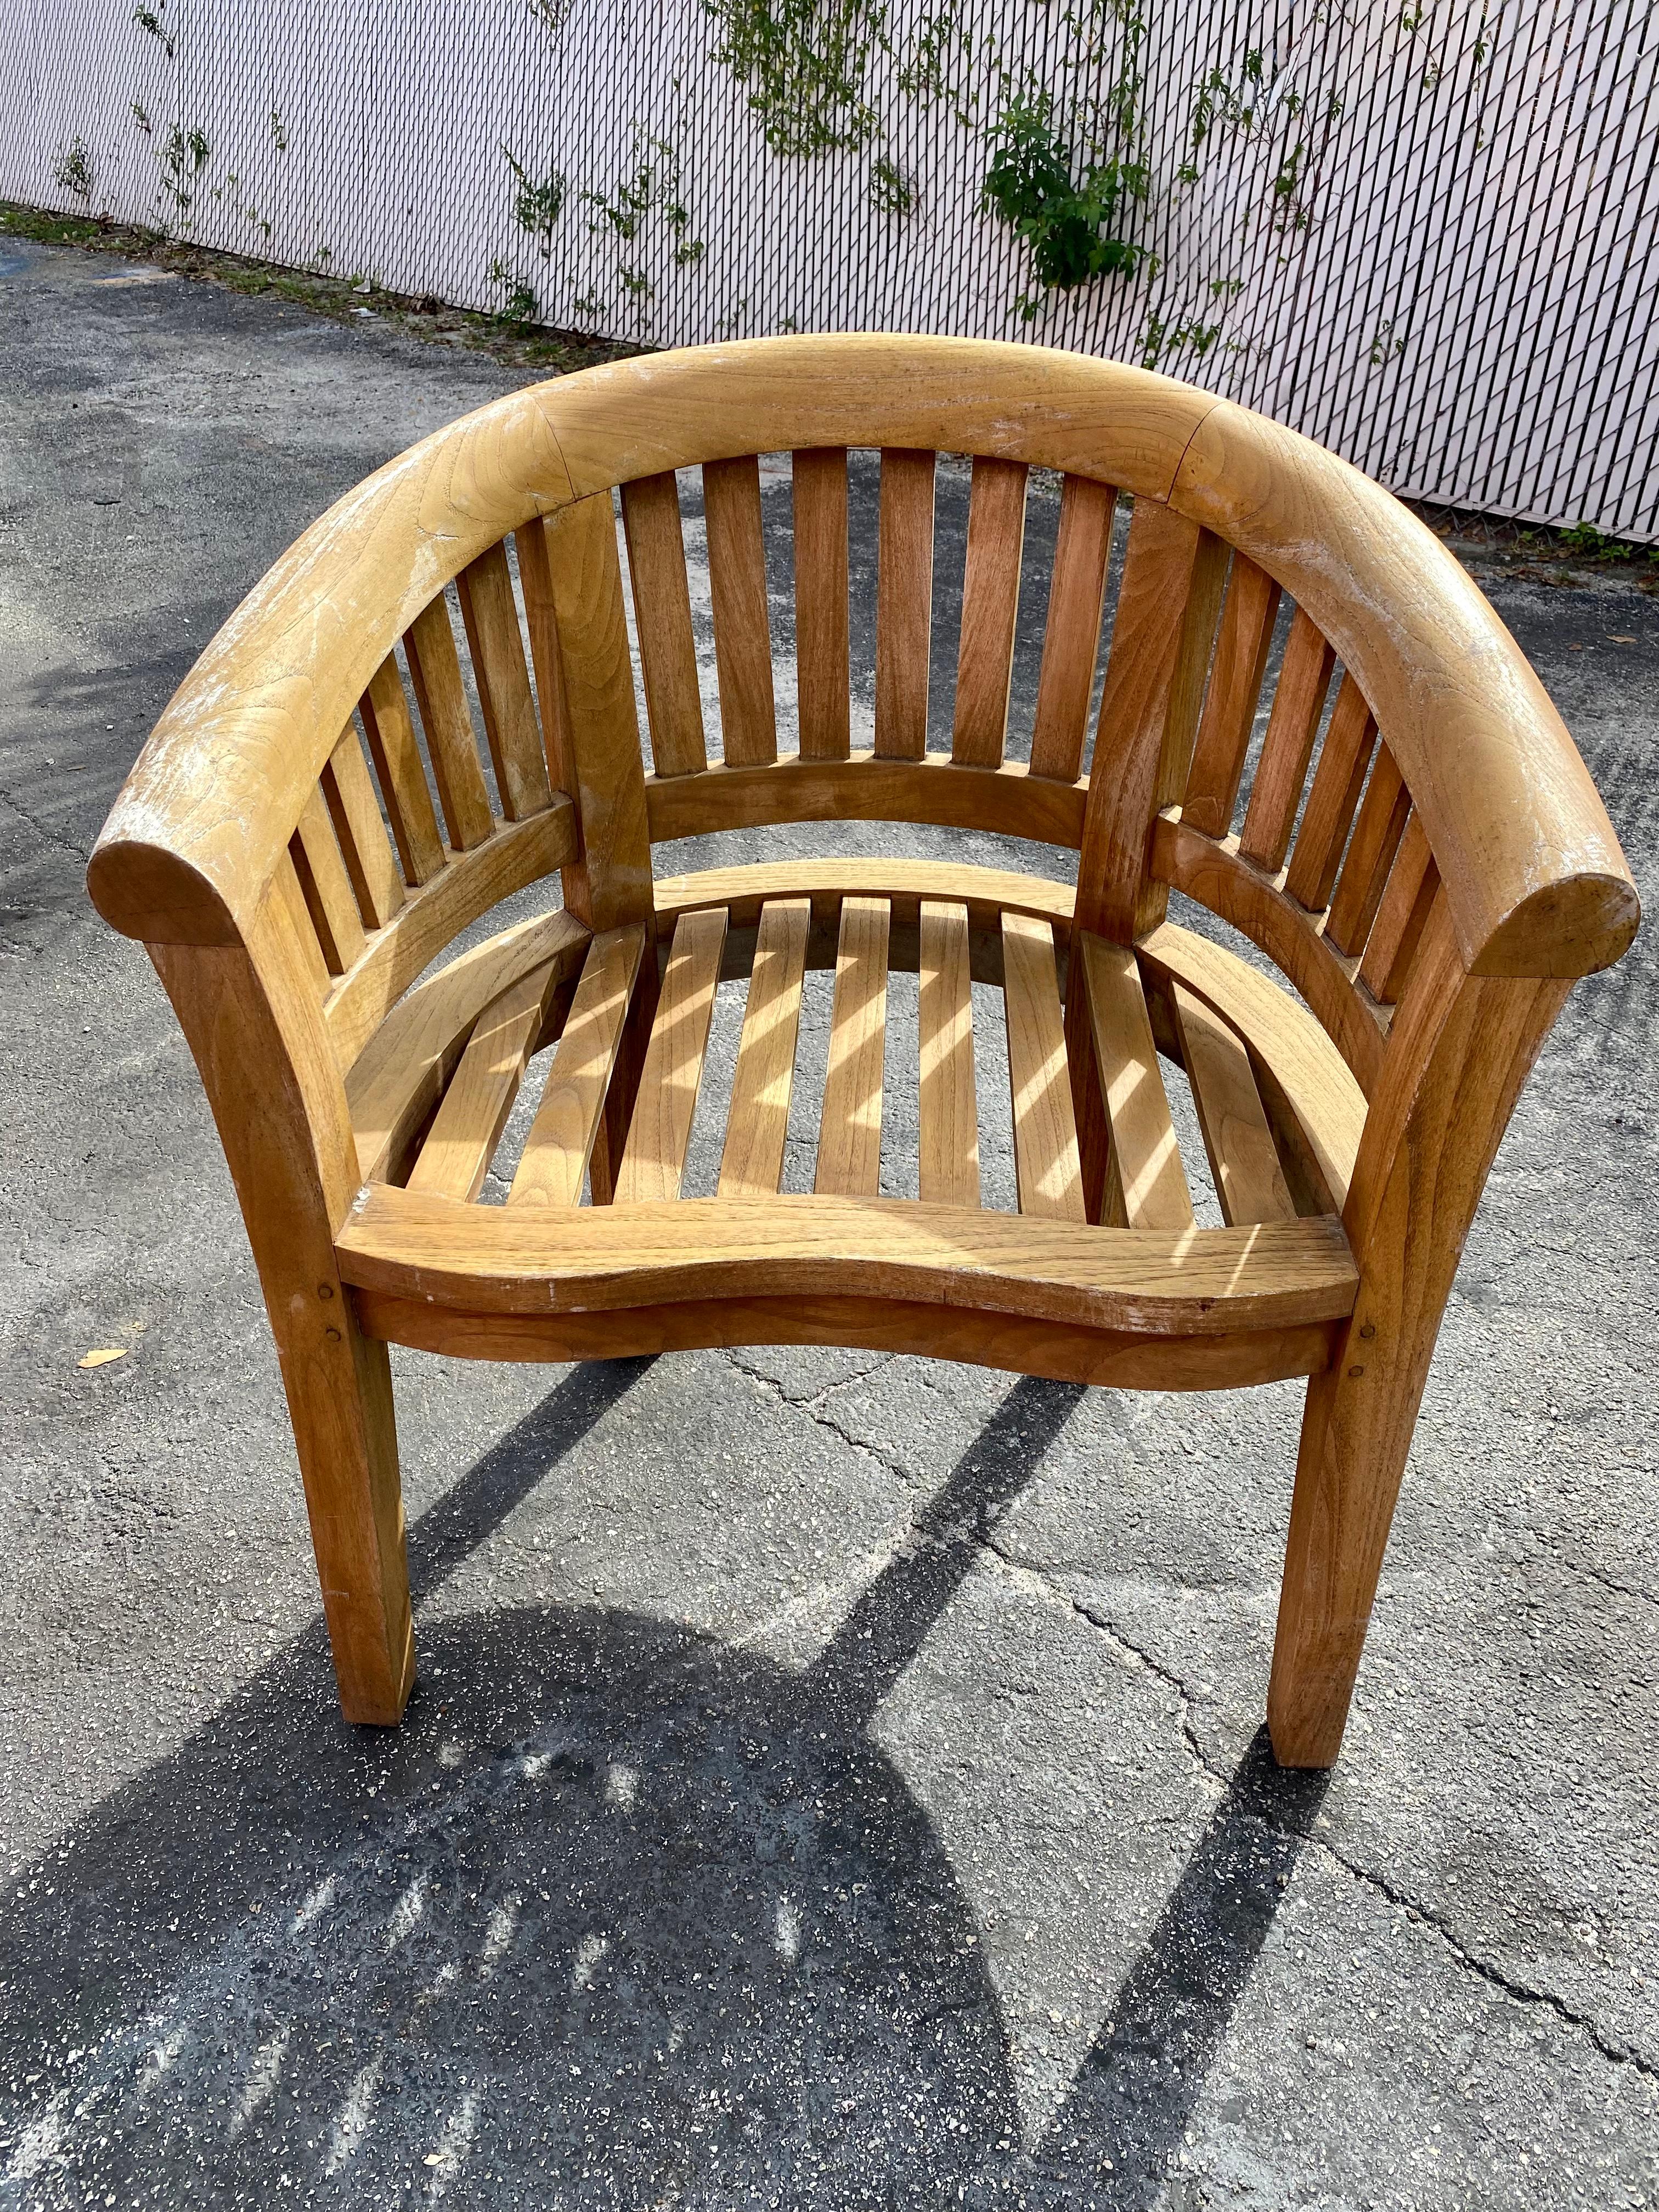 1970s Teak Curved Barrel Kidney Slatted Settee Table Chairs, Set of 4 For Sale 3